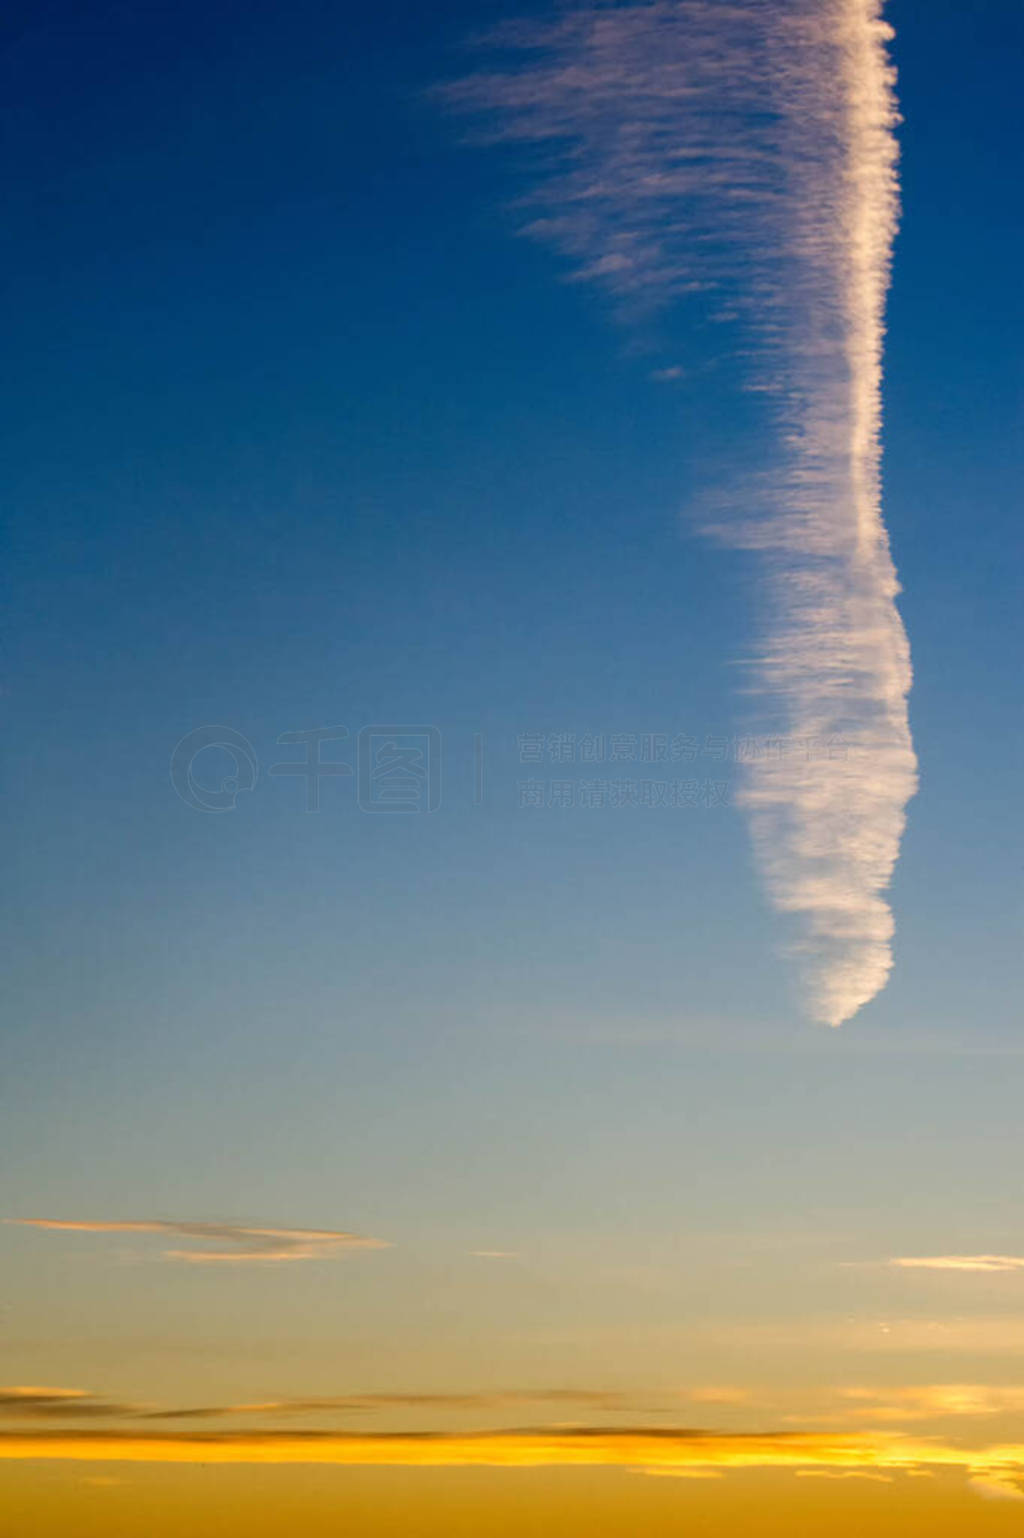 clouds in the blue sky. a visible mass of condensed water vapor